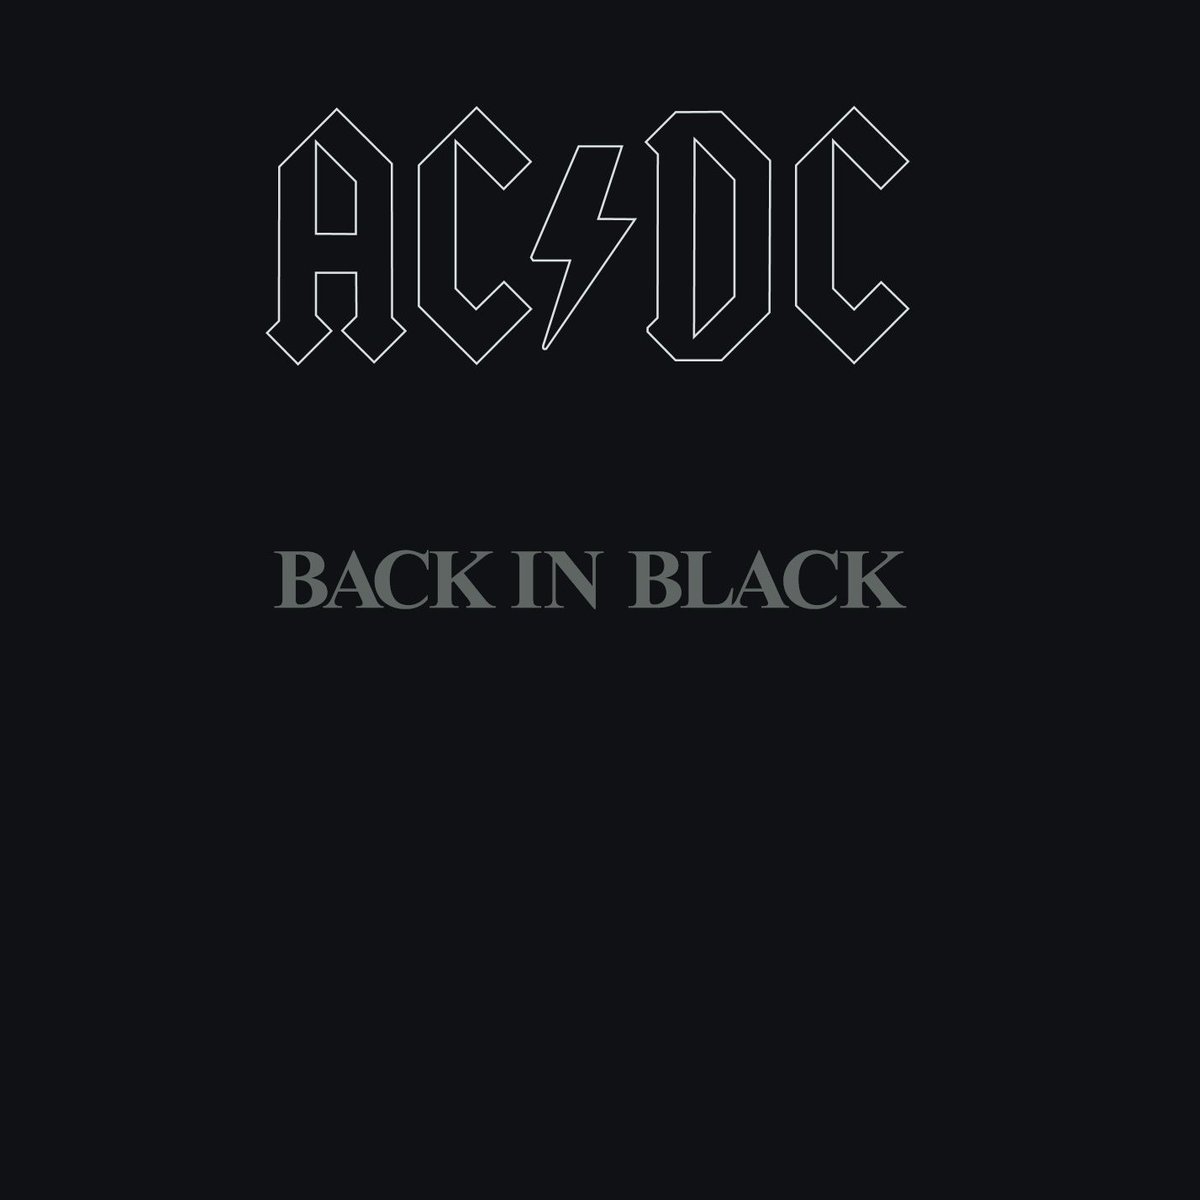 Back in Black was released in the U.S. 40 years ago  #OTD. The title track was also the album's lead single and was written as a tribute to Bon Scott. The opening guitar riff is one of the most iconic in rock history.  #BACKINBLACK40  #albumoftheday